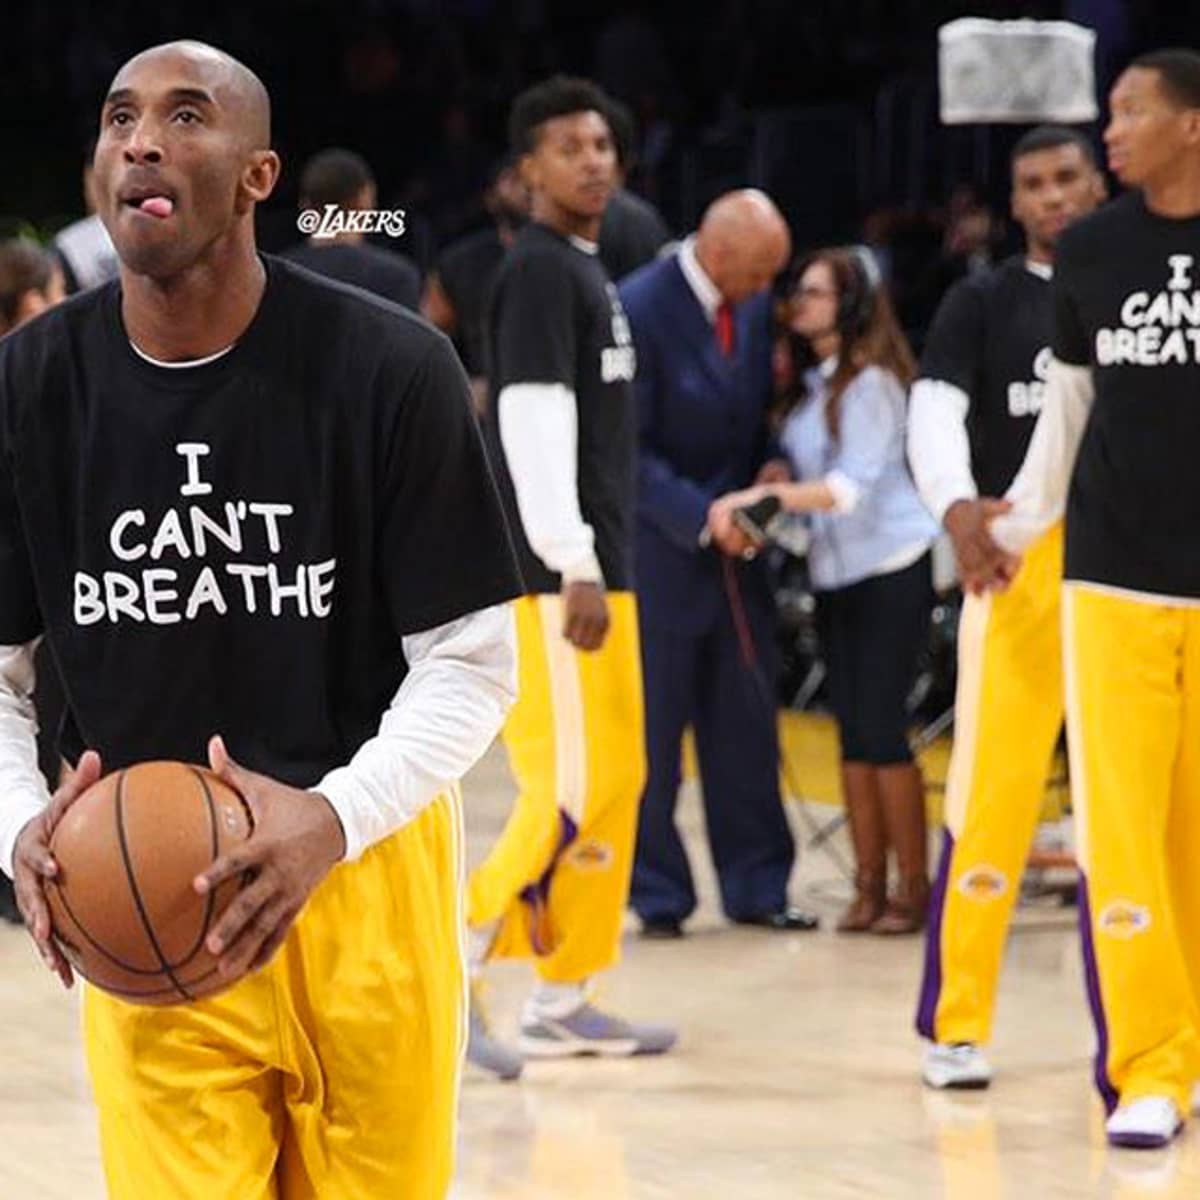 Kobe Bryant and LA Lakers don 'I Can't Breathe' shirts over police